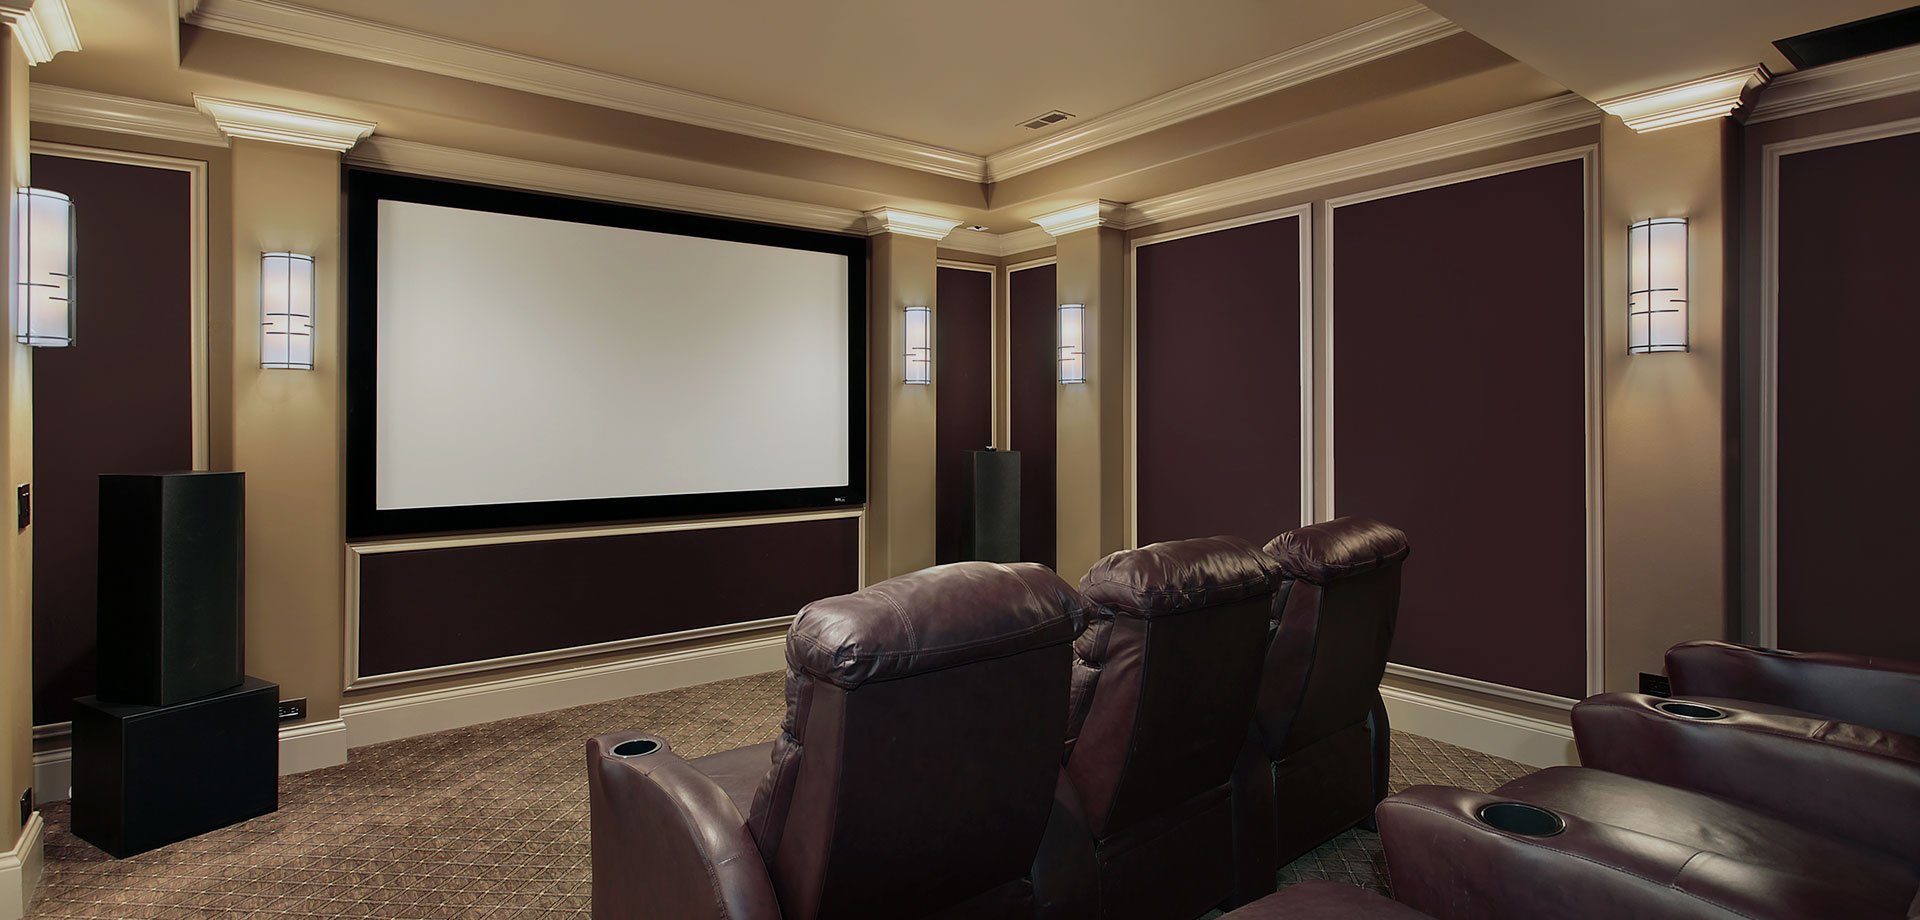 Home Theater set up with audio visual equipment and burgundy recliners